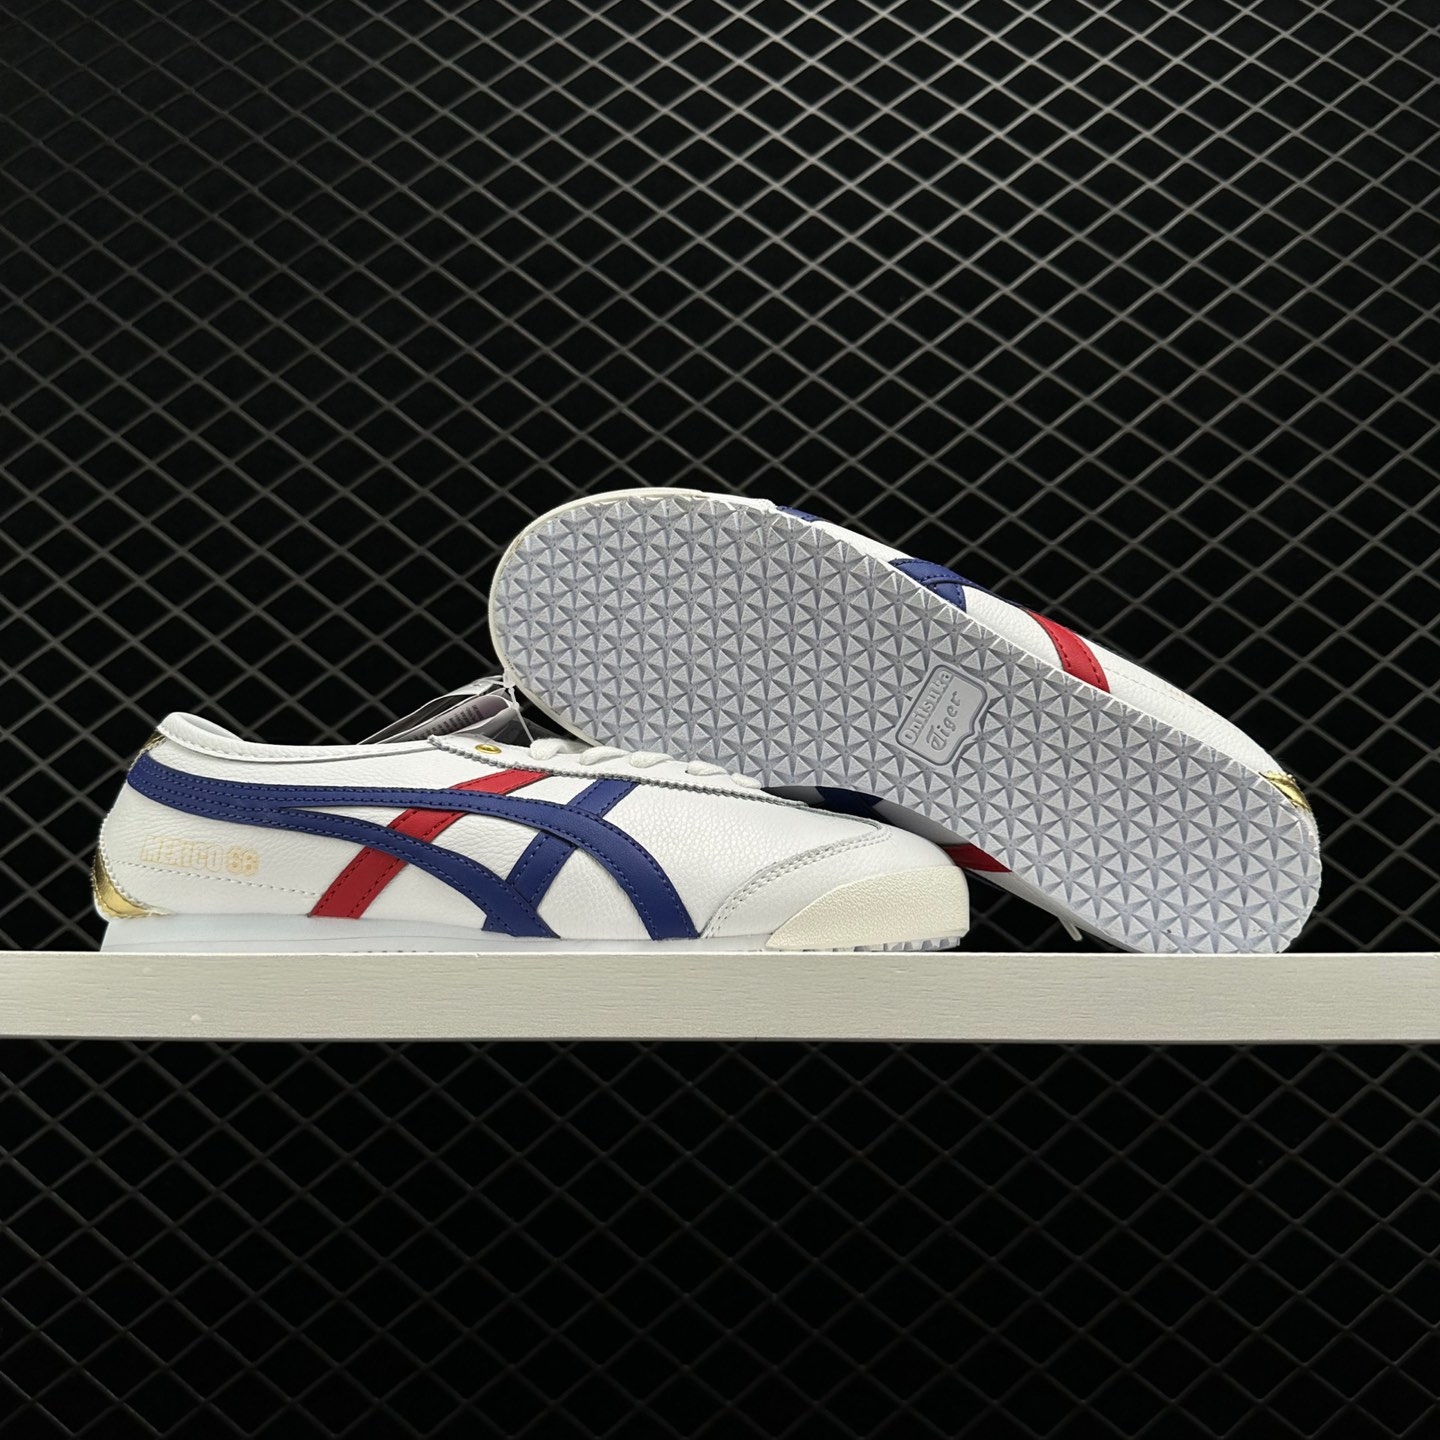 Onitsuka Tiger Mexico 66 Blue Red Metallic Gold - D507L-0152 | Stylish Sneakers for Men